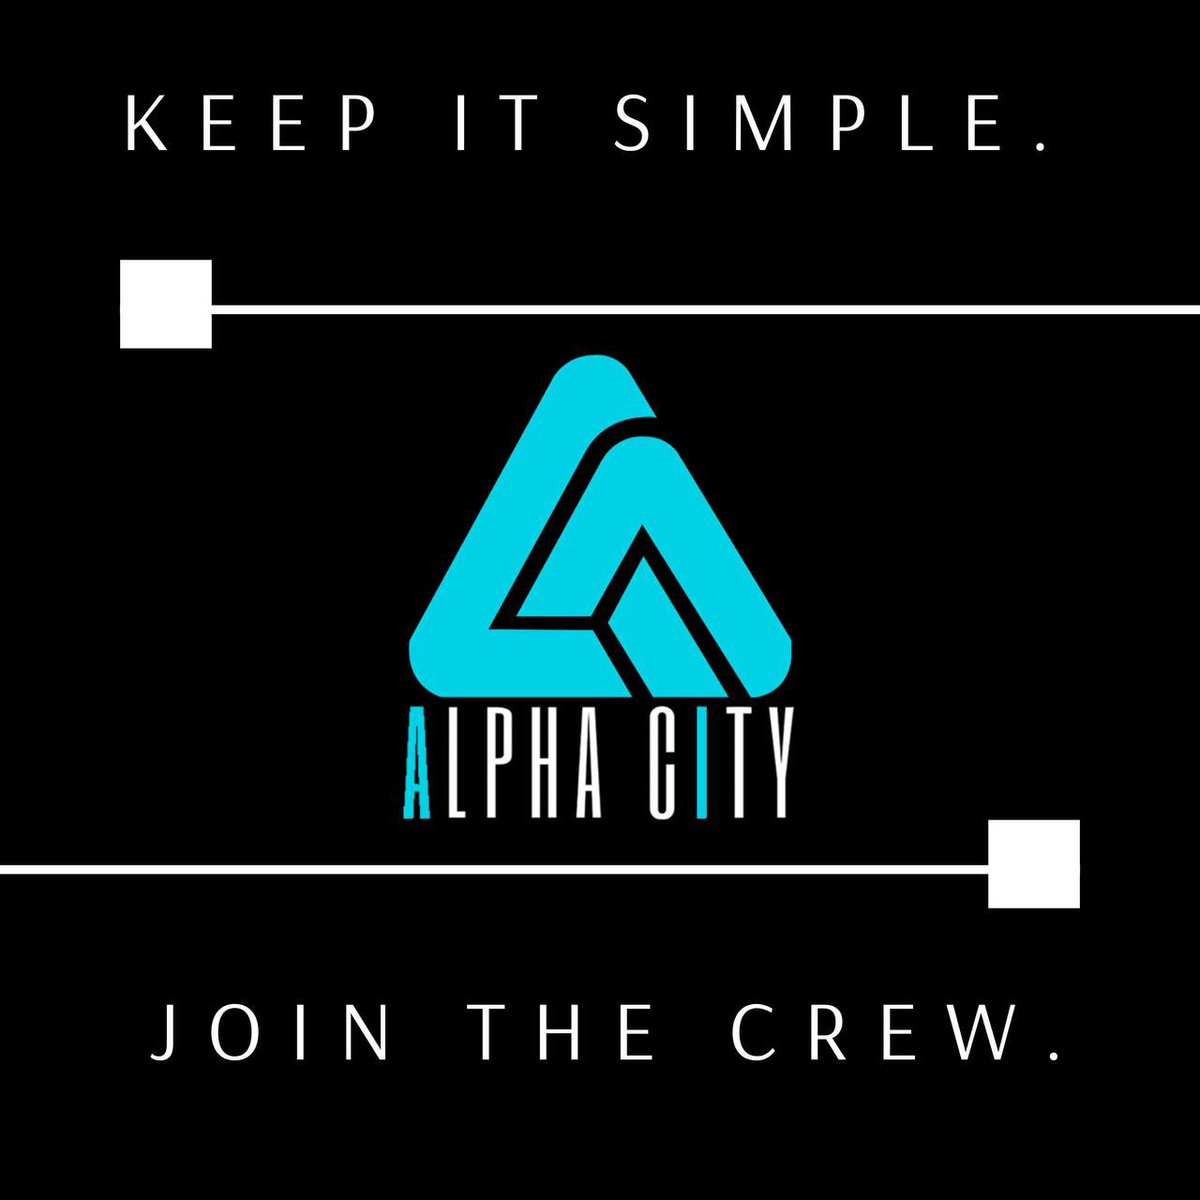 Introducing AlphaCityAI, the groundbreaking metaverse experience that is reshaping the way we interact with virtual reality. This innovative platform combines social, business, and lifestyle elements to create a fully immersive environment like never before. Powered by the